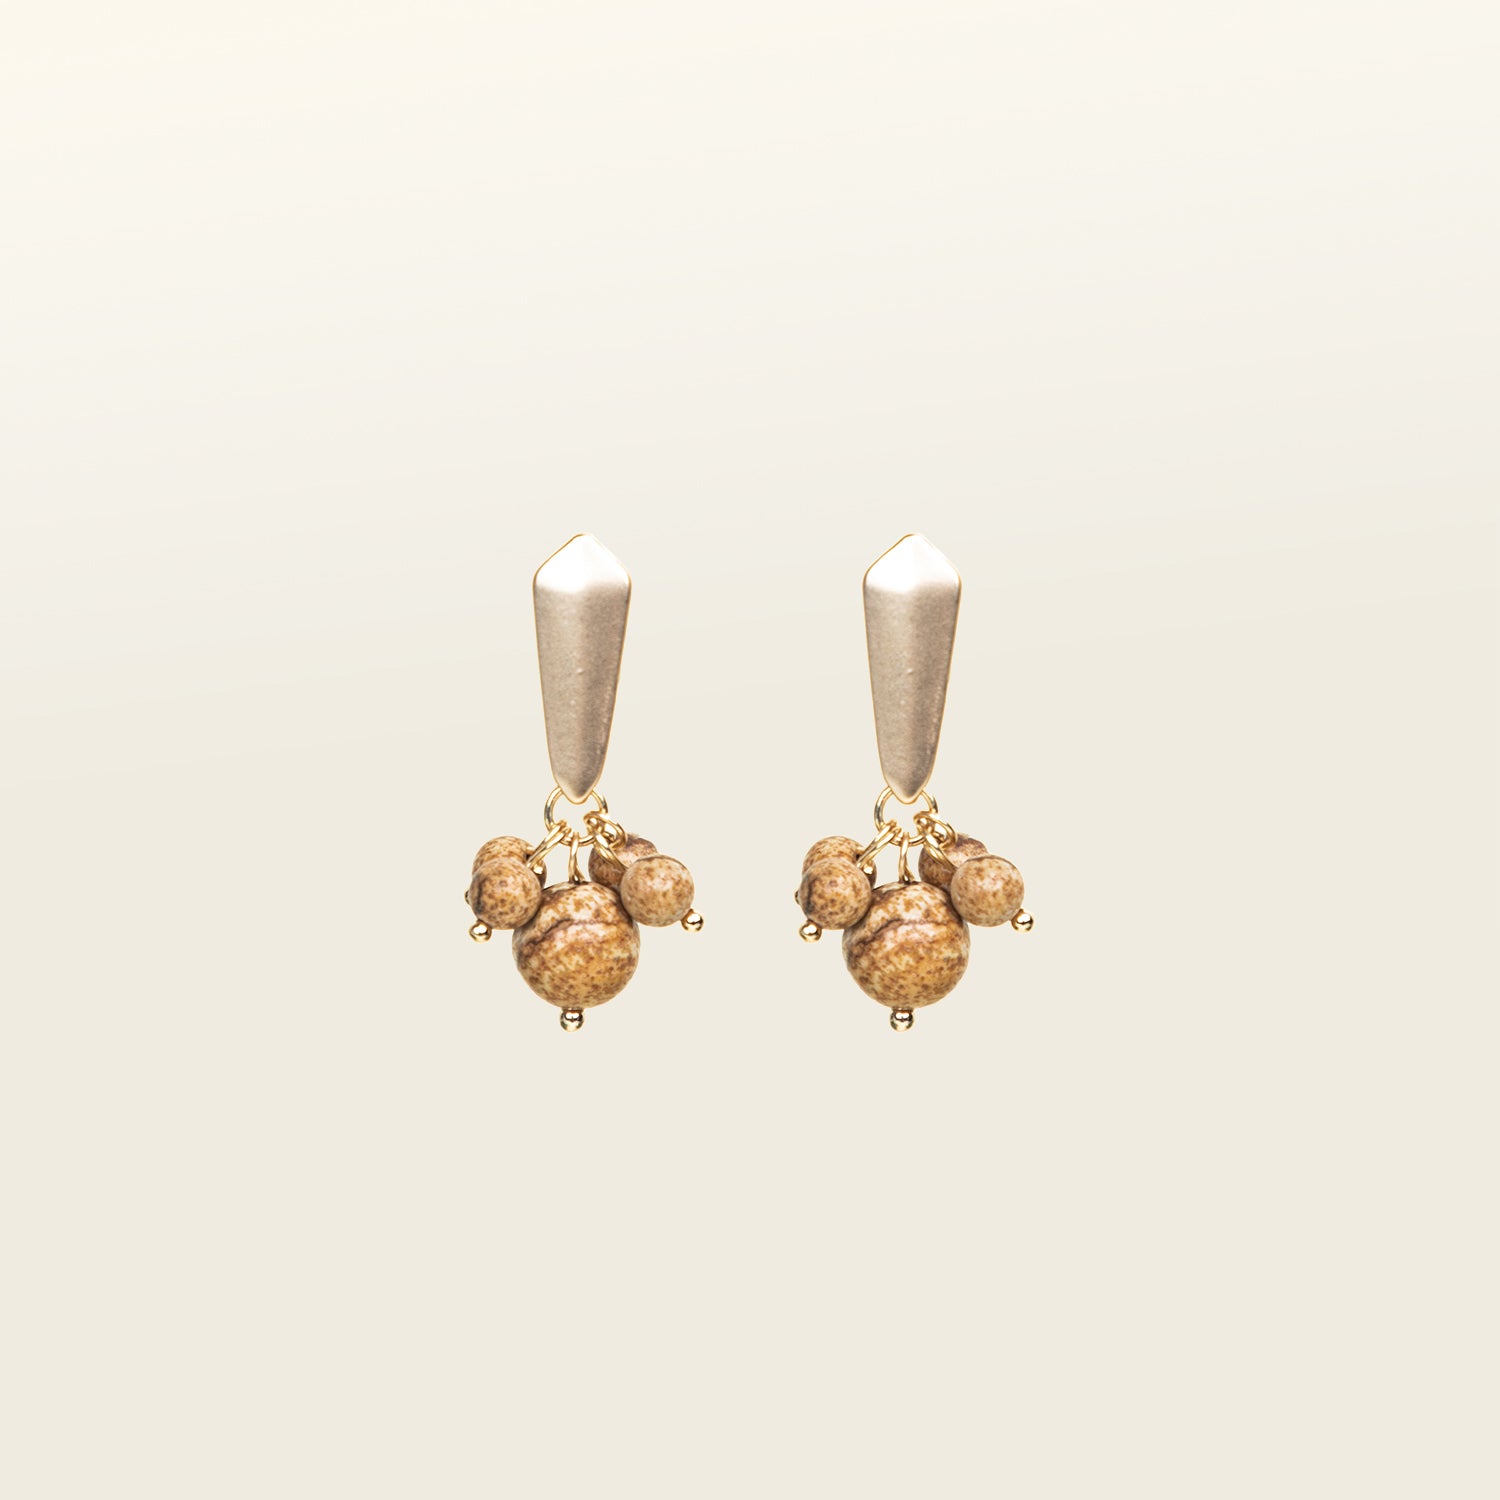 Stunning light brown clip-on earrings with a secure hold. Made from matte gold tone copper alloy, agate, and glass bead. These earrings suit all ear types and offer an elegant style with the Clip-On closure and removable rubber padding.